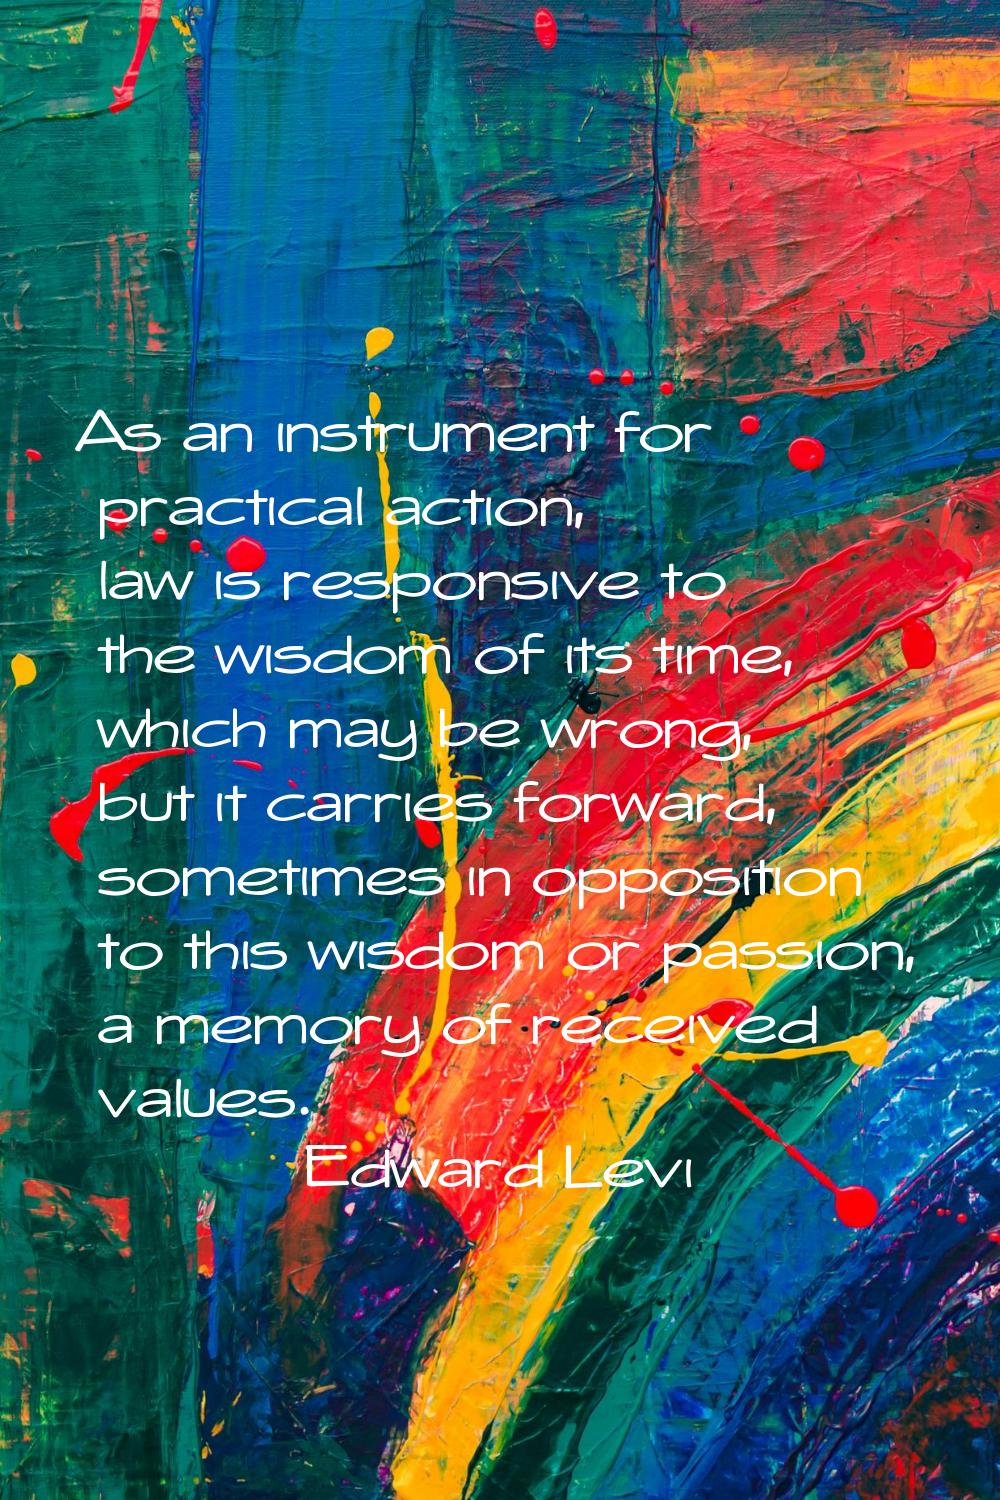 As an instrument for practical action, law is responsive to the wisdom of its time, which may be wr